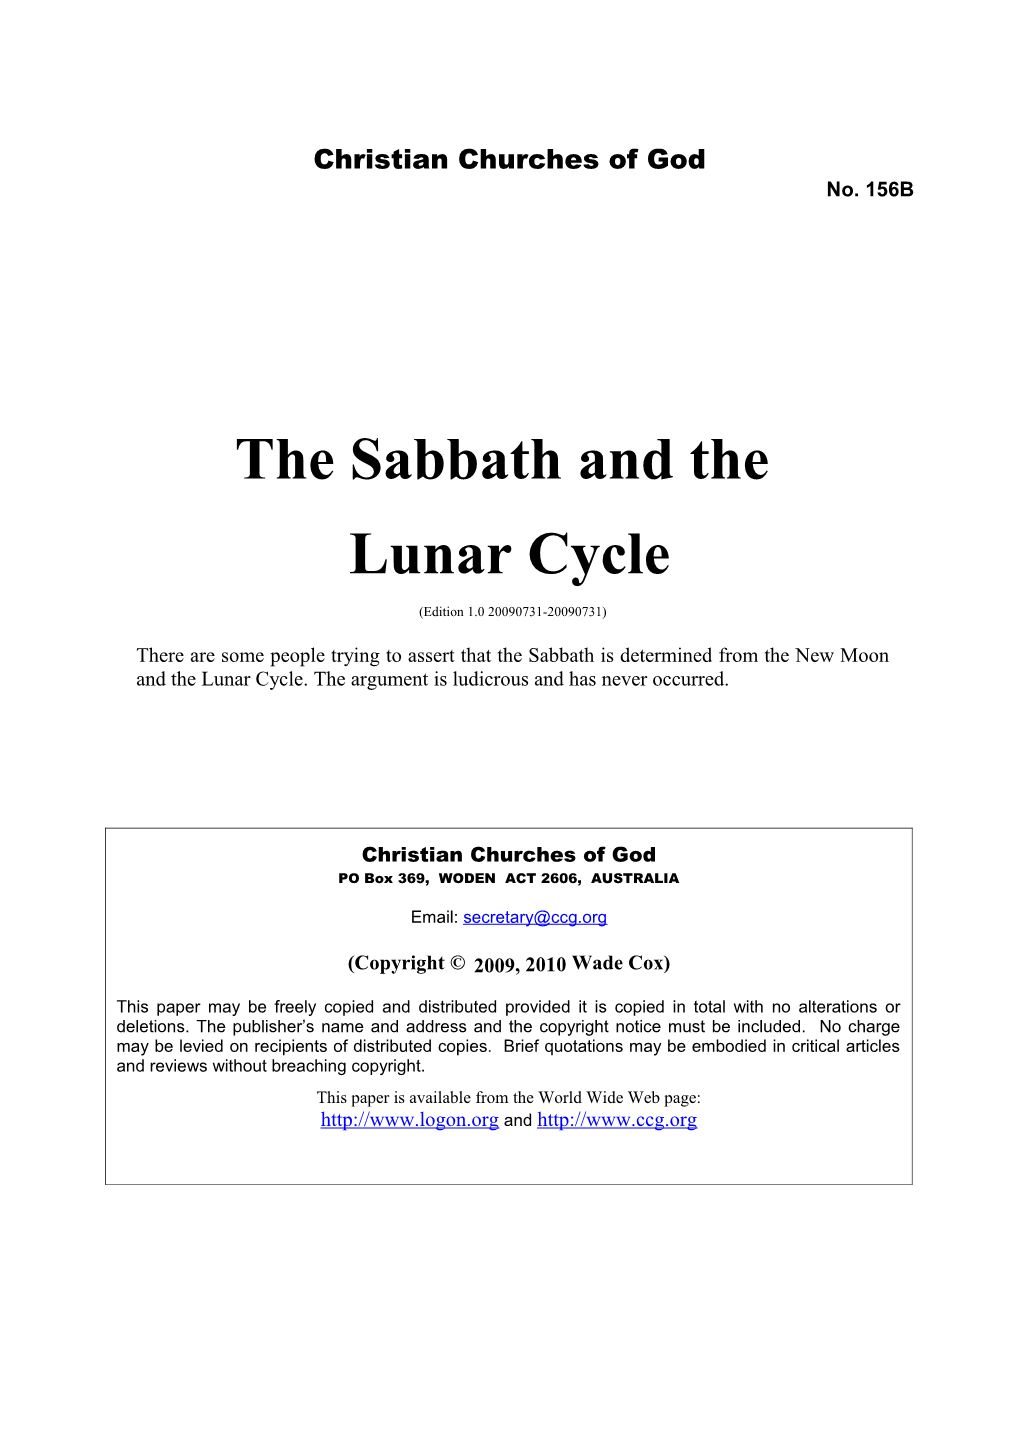 The Sabbath and the Lunar Cycle (No. 156B)